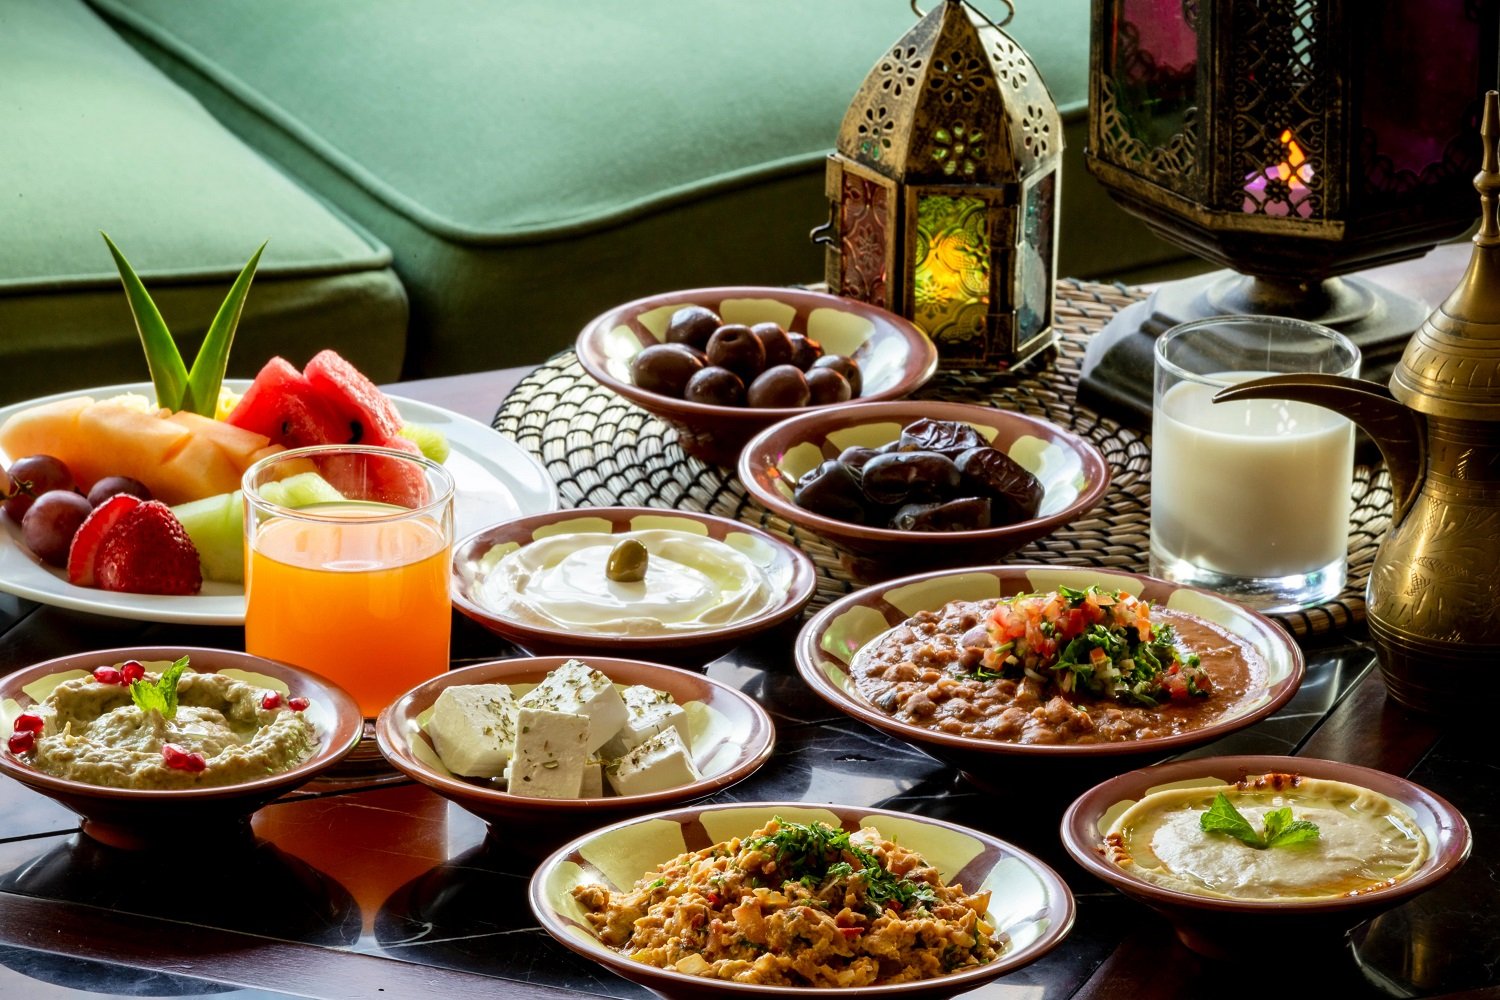 9 Foods to Try Out When Visiting Dubai